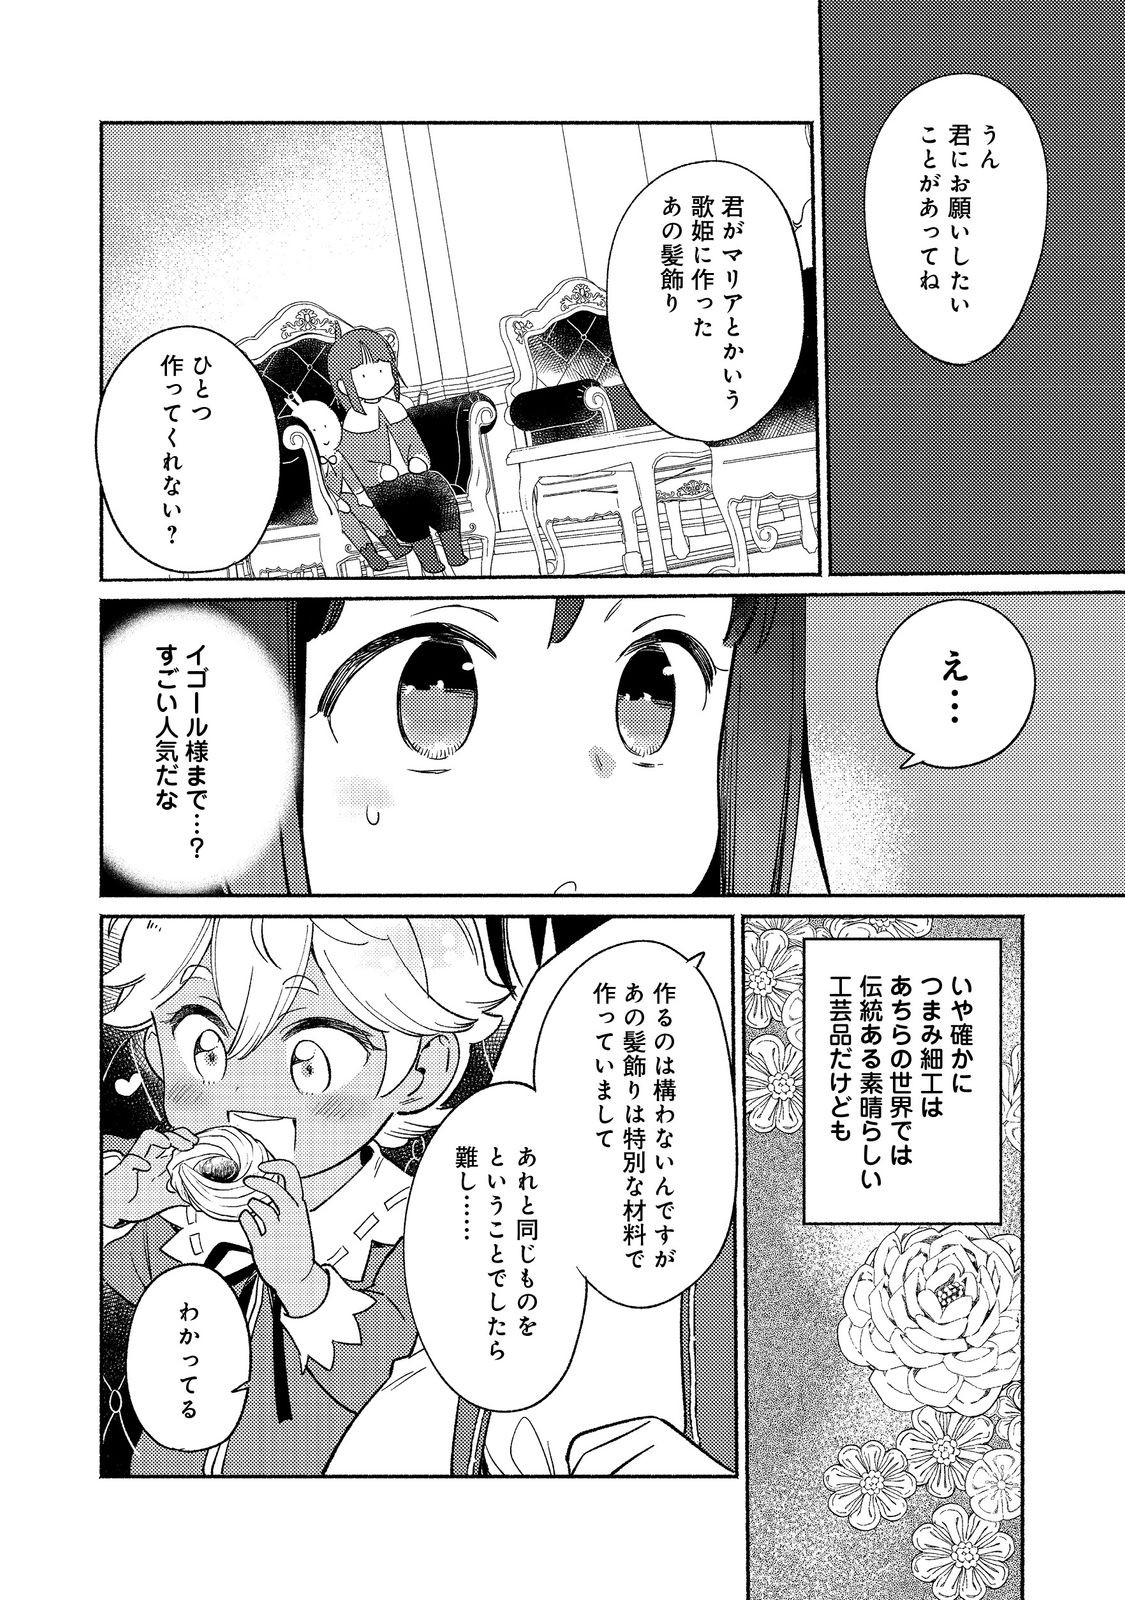 I’m the White Pig Nobleman 第19.1話 - Page 14